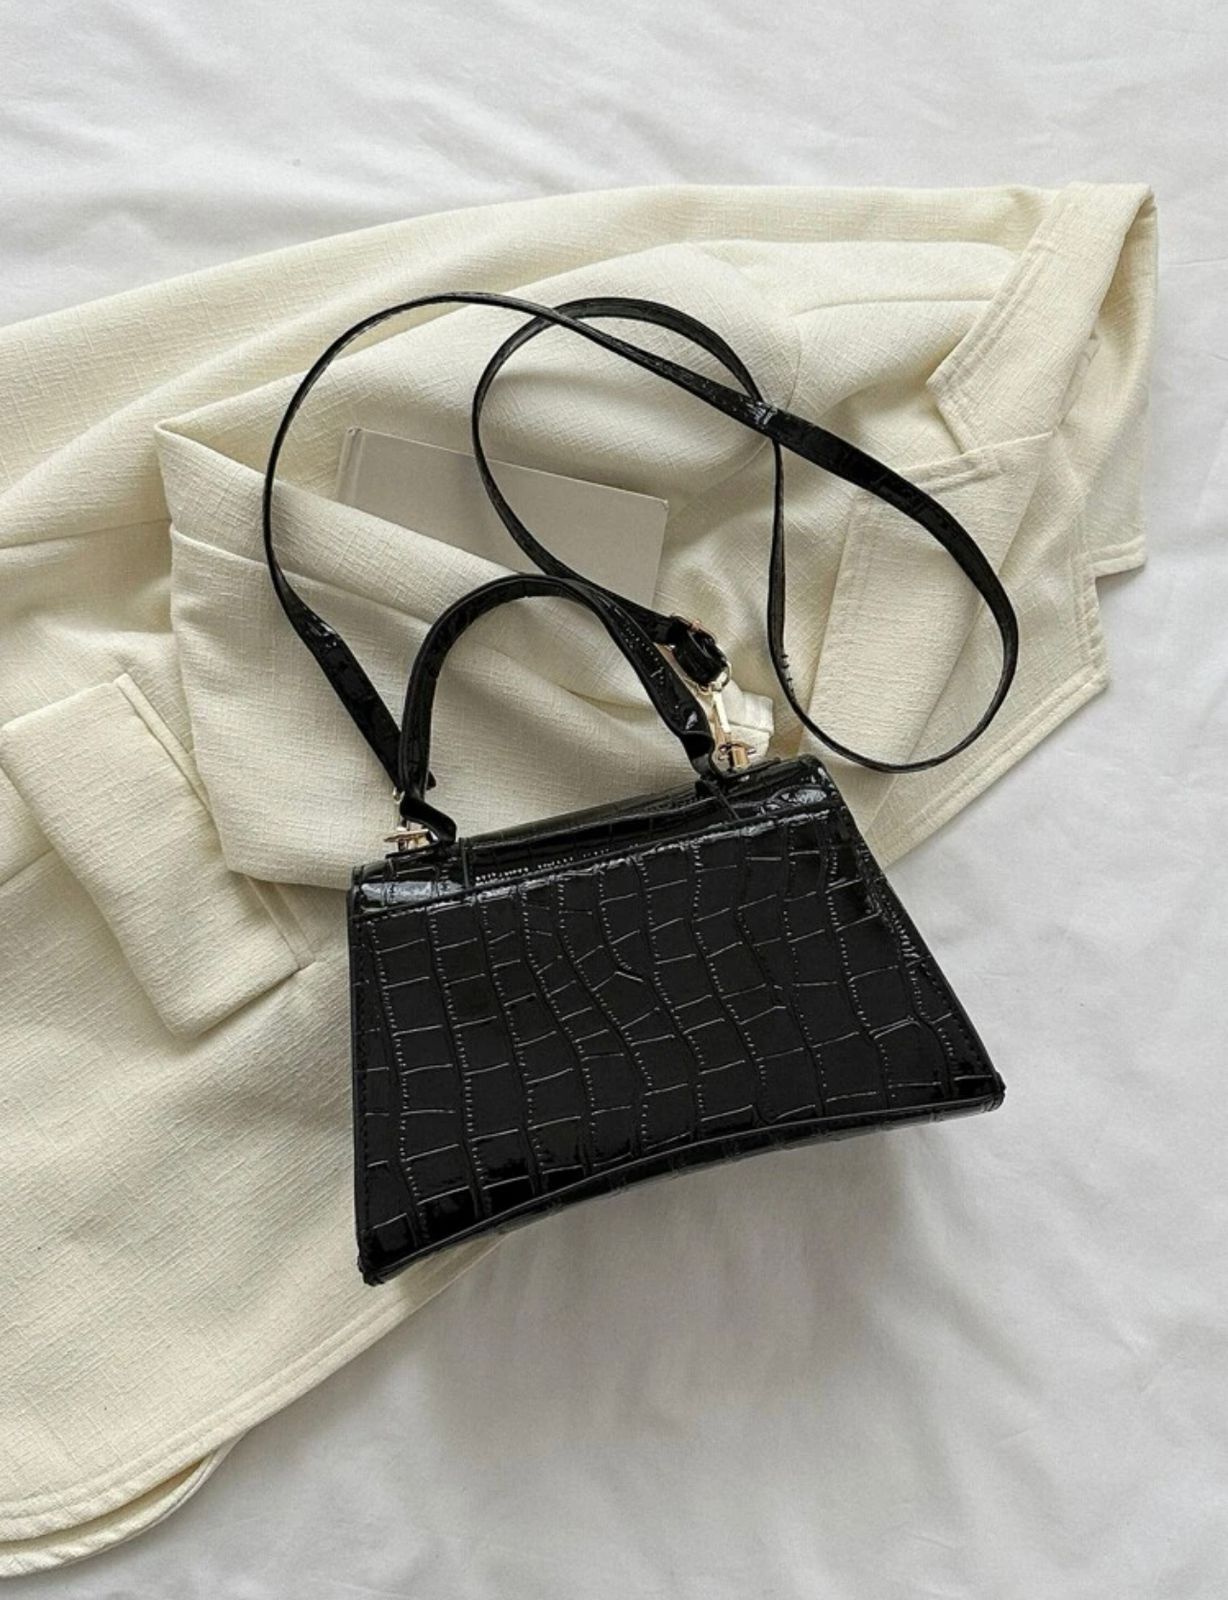 23-ChicEssence Mini CrossLeather Bag